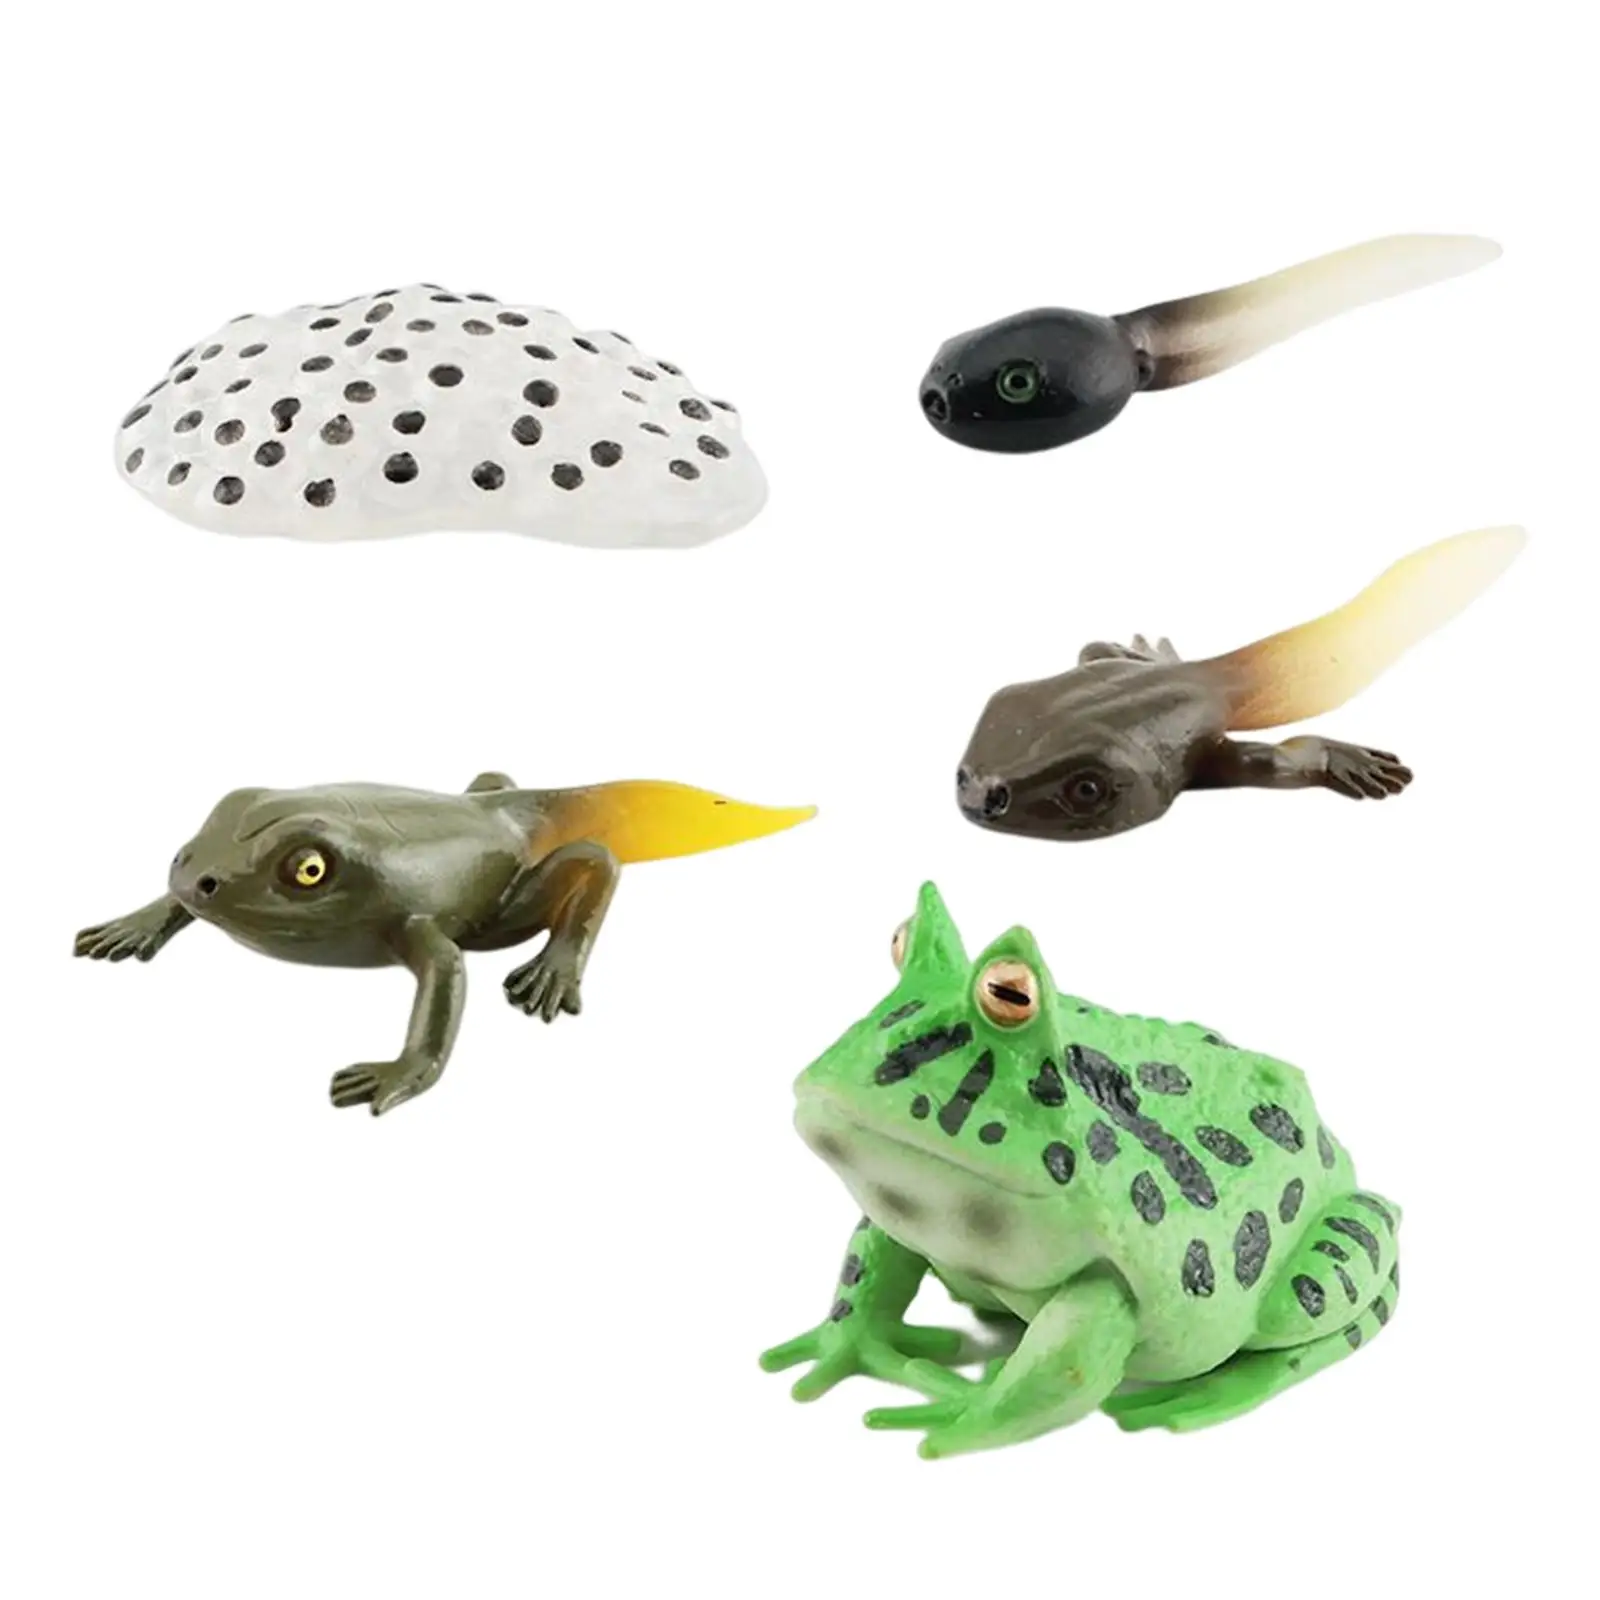 Life Cycle Figurines Realistic Animal Figurines Playset Frogs Life Cycle Model for Children Toddlers Kids Teaching Materials